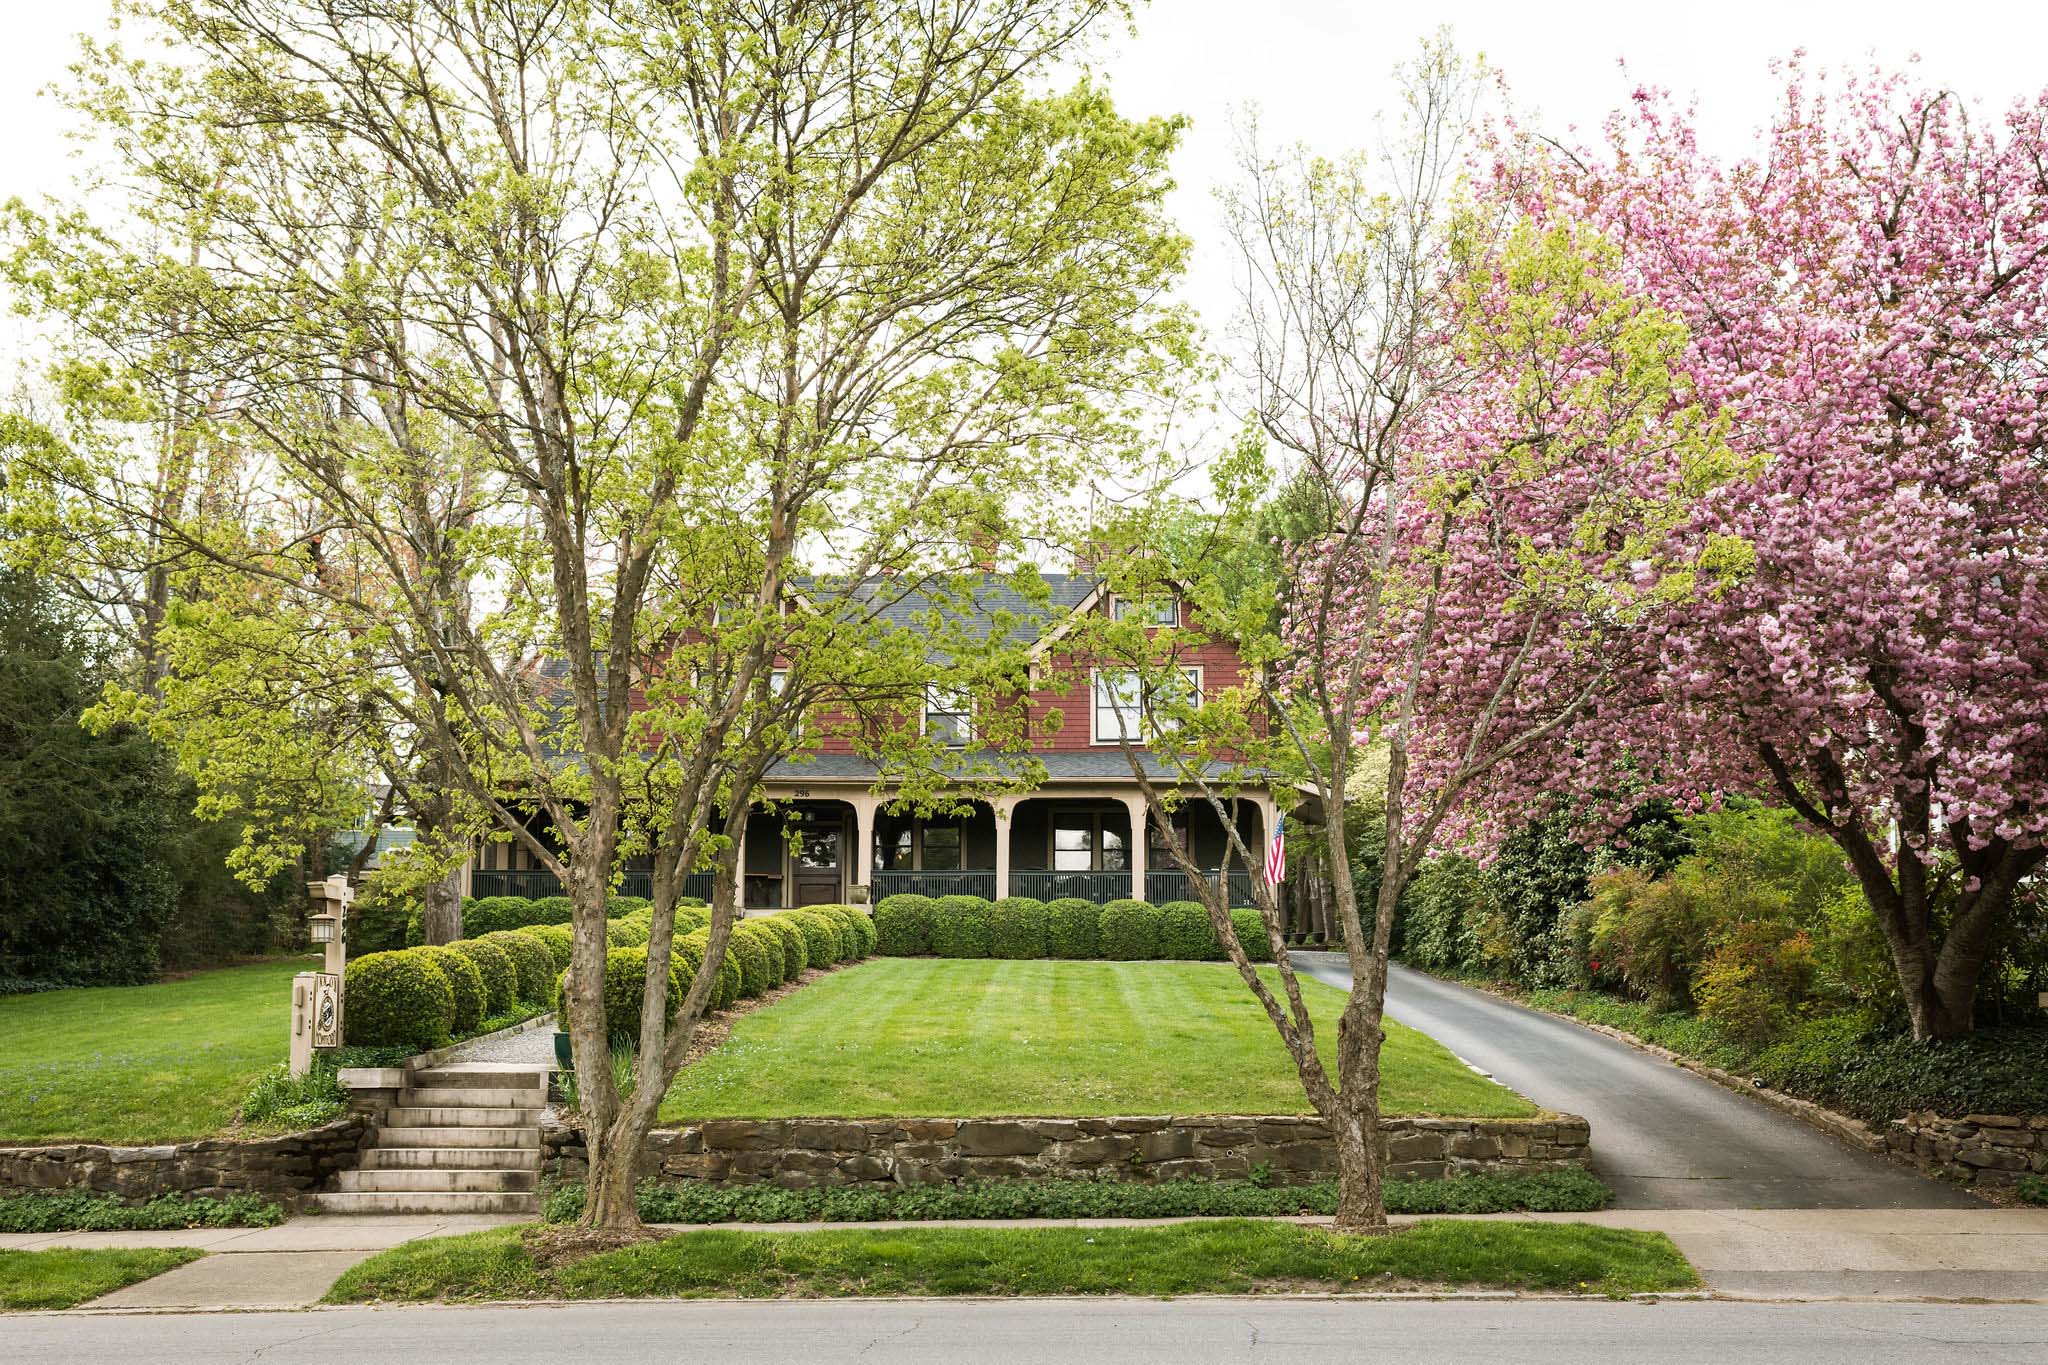 The front side of the Bed and Breakfast in Asheville with two tall trees growing on the sidewalk, cherry blossom trees to the right. Front yard with trimmed lawn and rows of green round ball bushes.